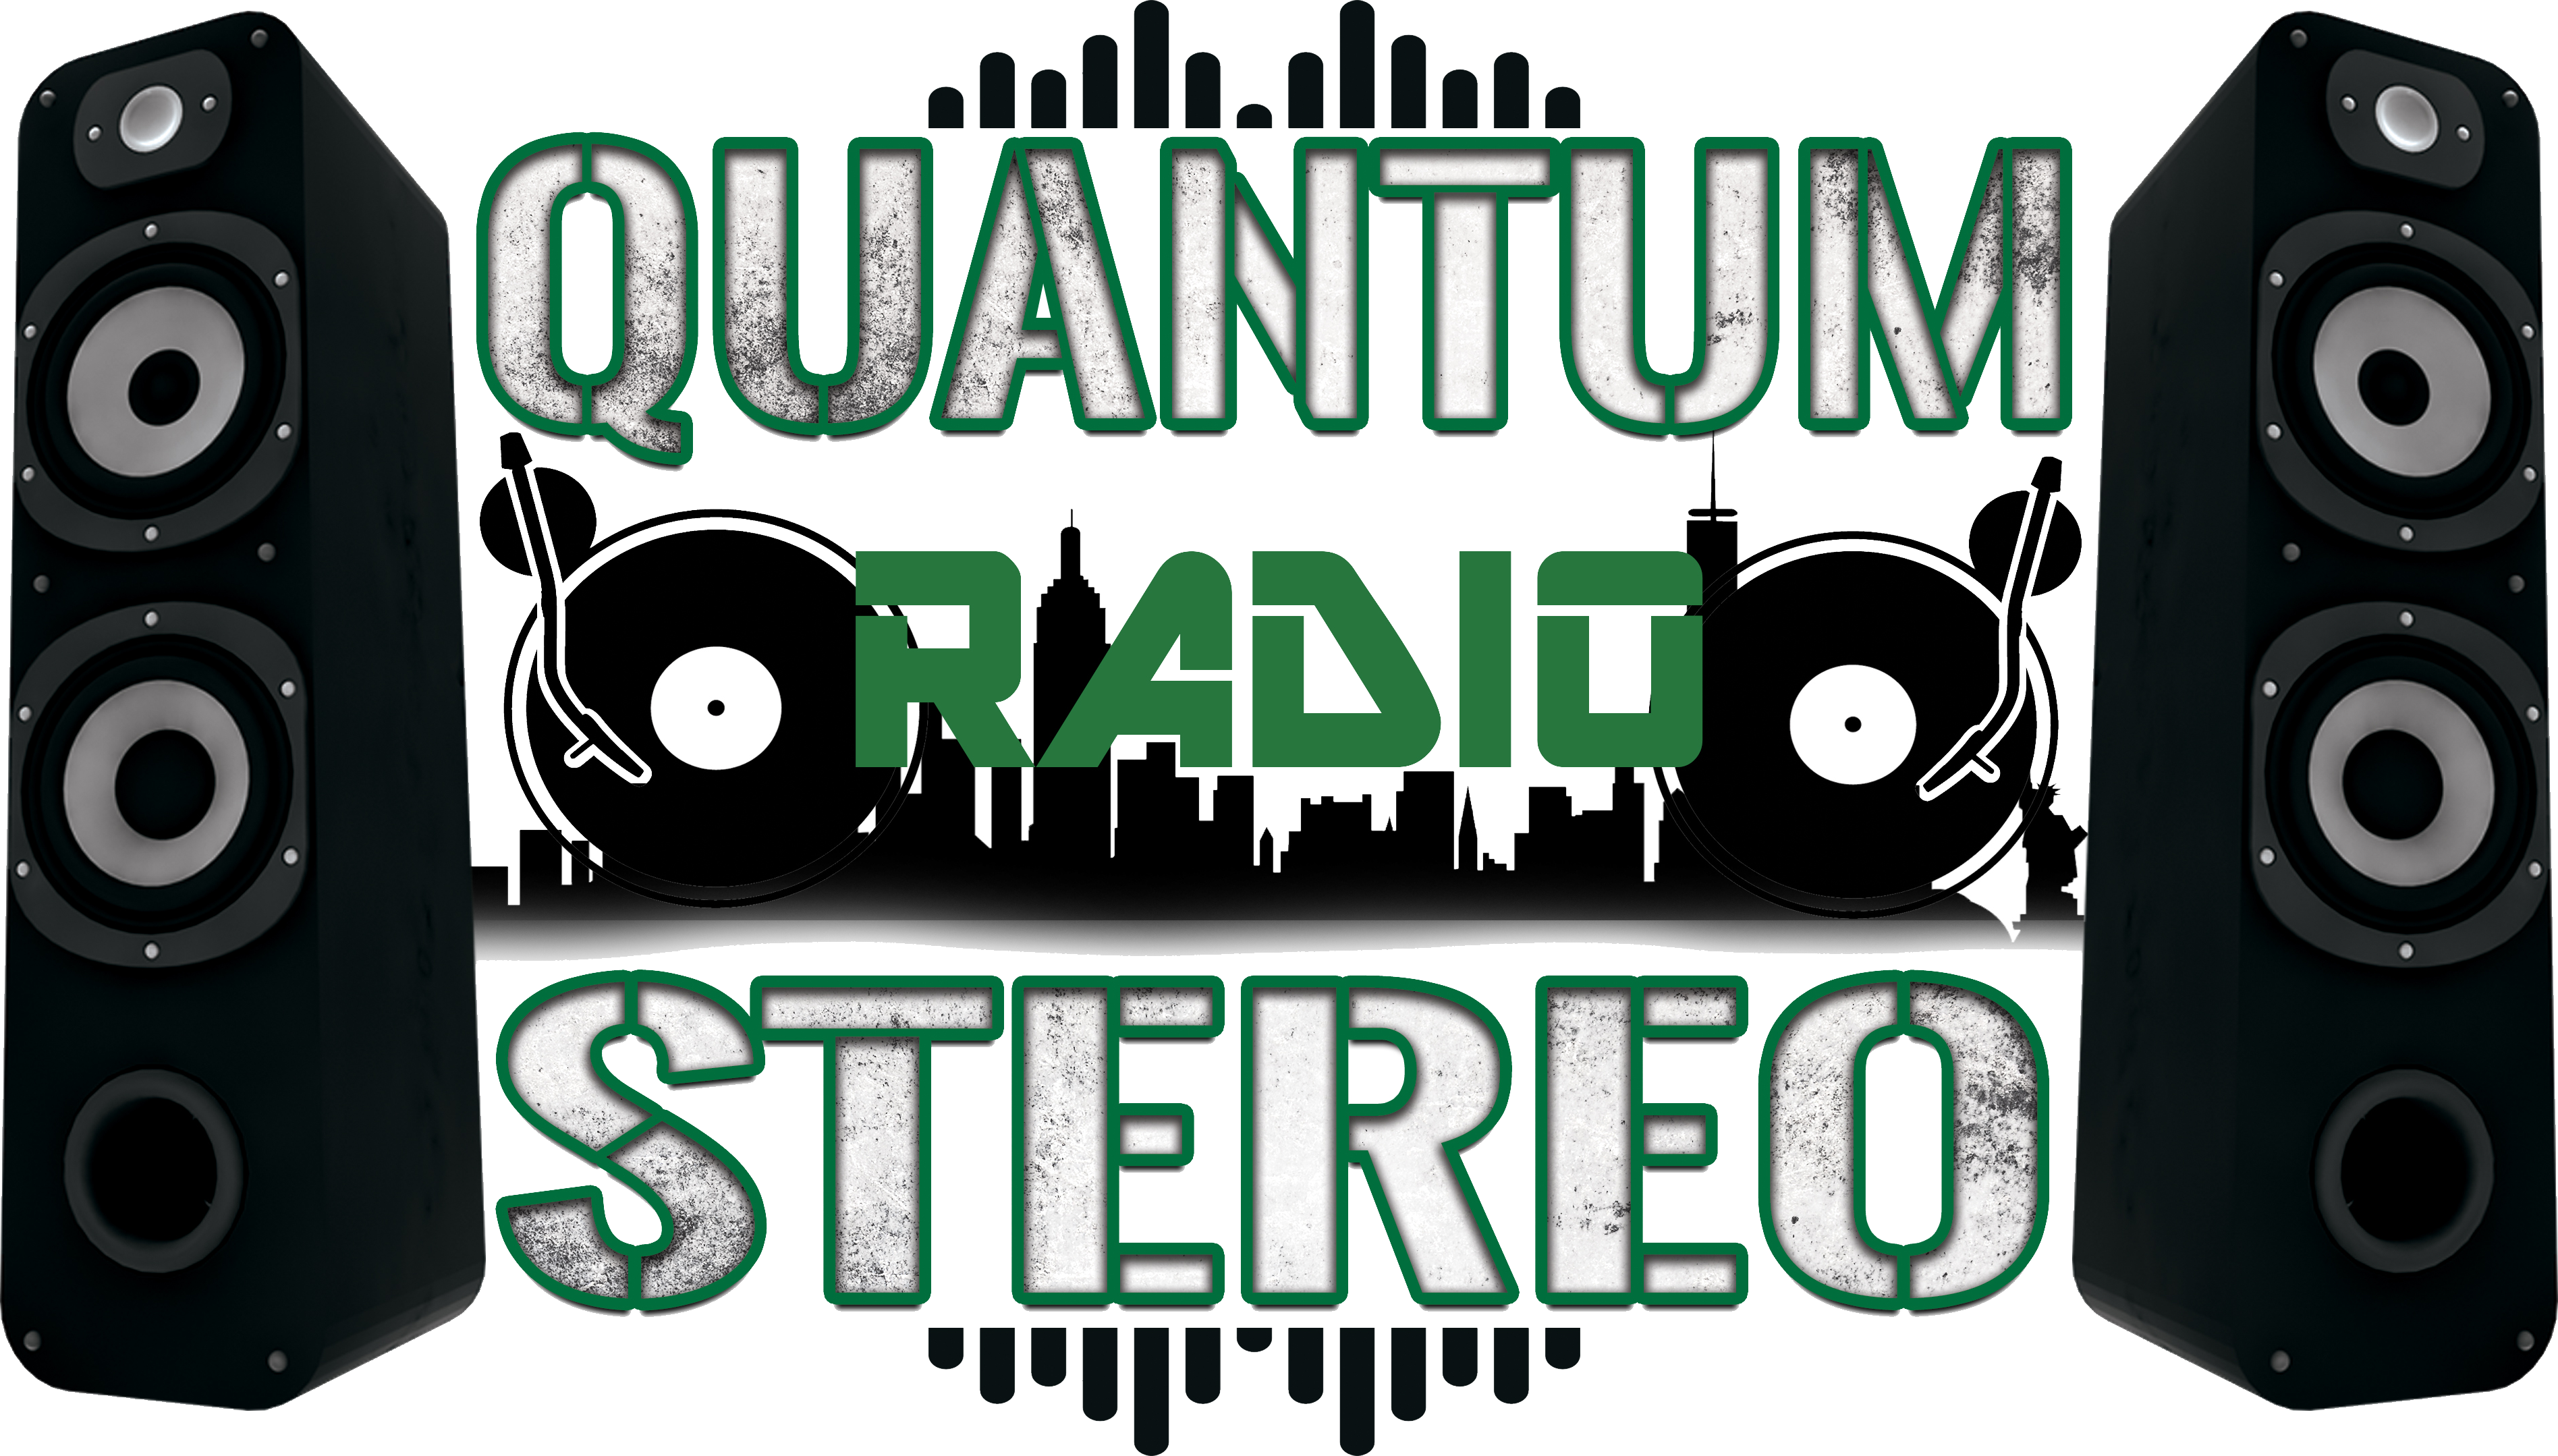 Art for Quantum Stereo Radio (4) by Untitled Artist